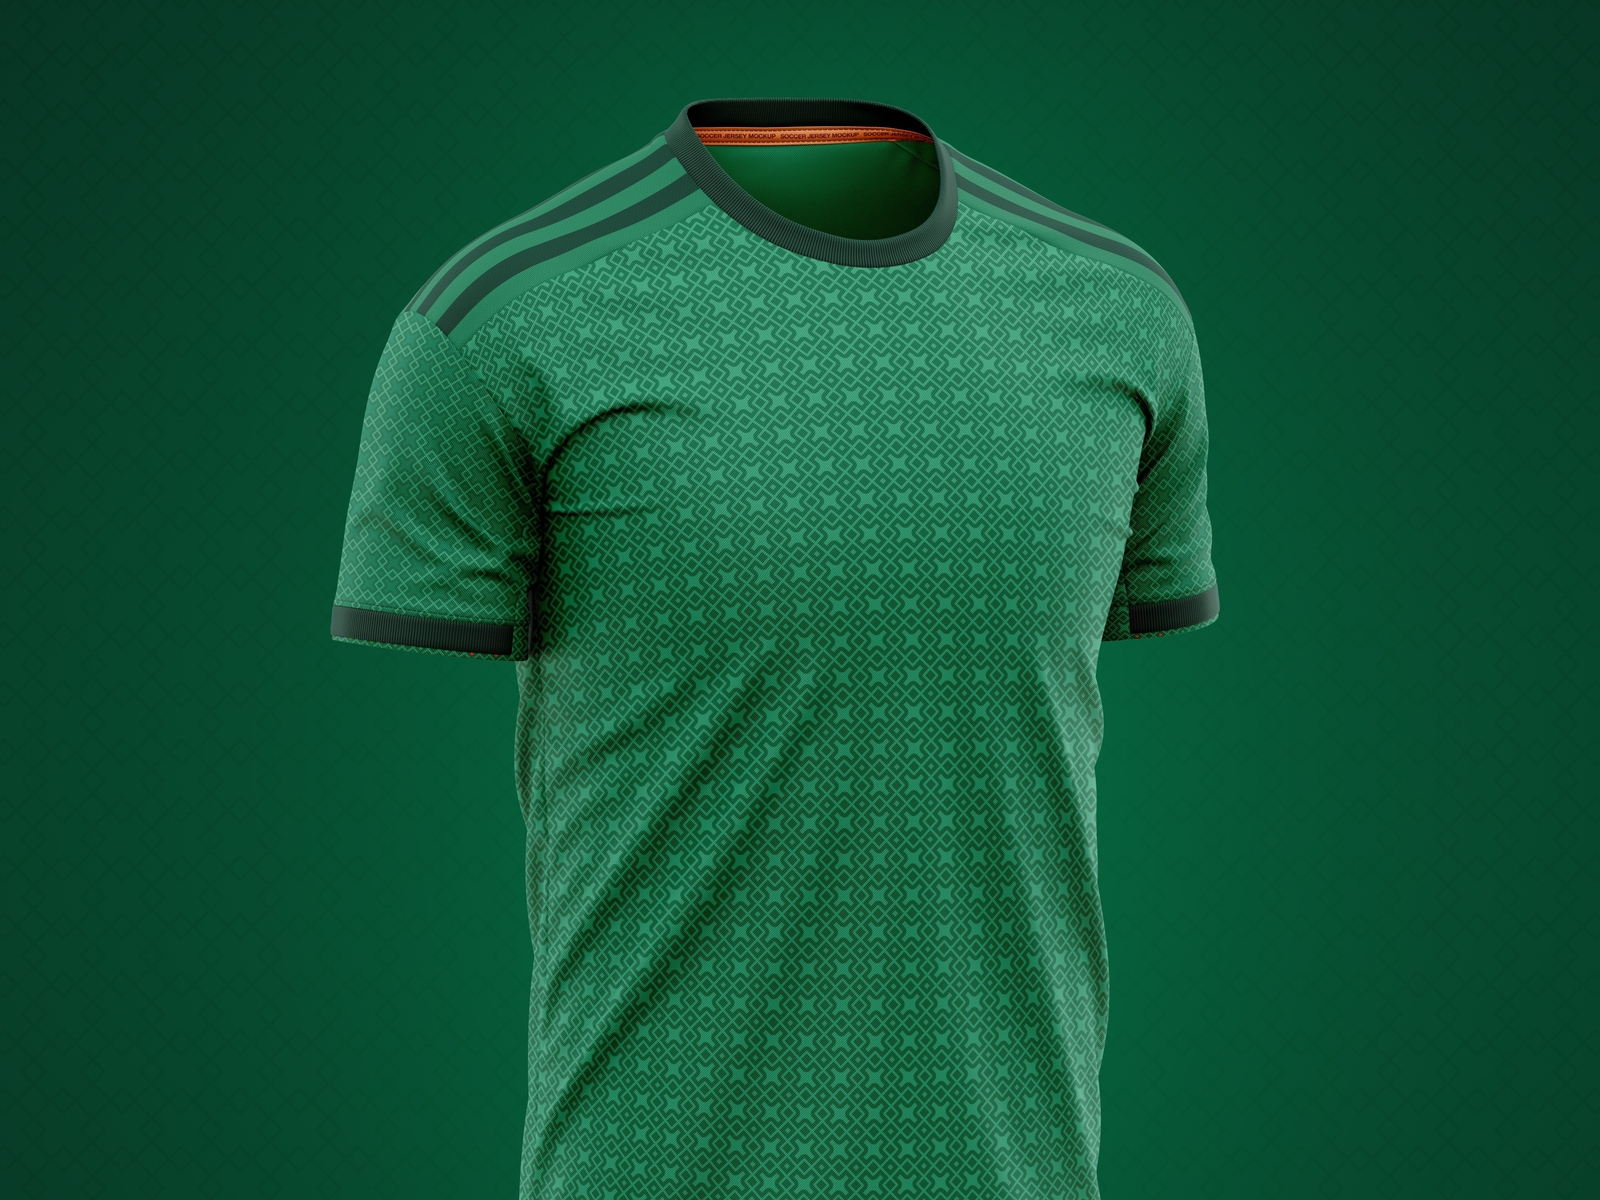 Download Soccer Jersey Mockup (2019 - 2020 Season) by CG Tailor on ...